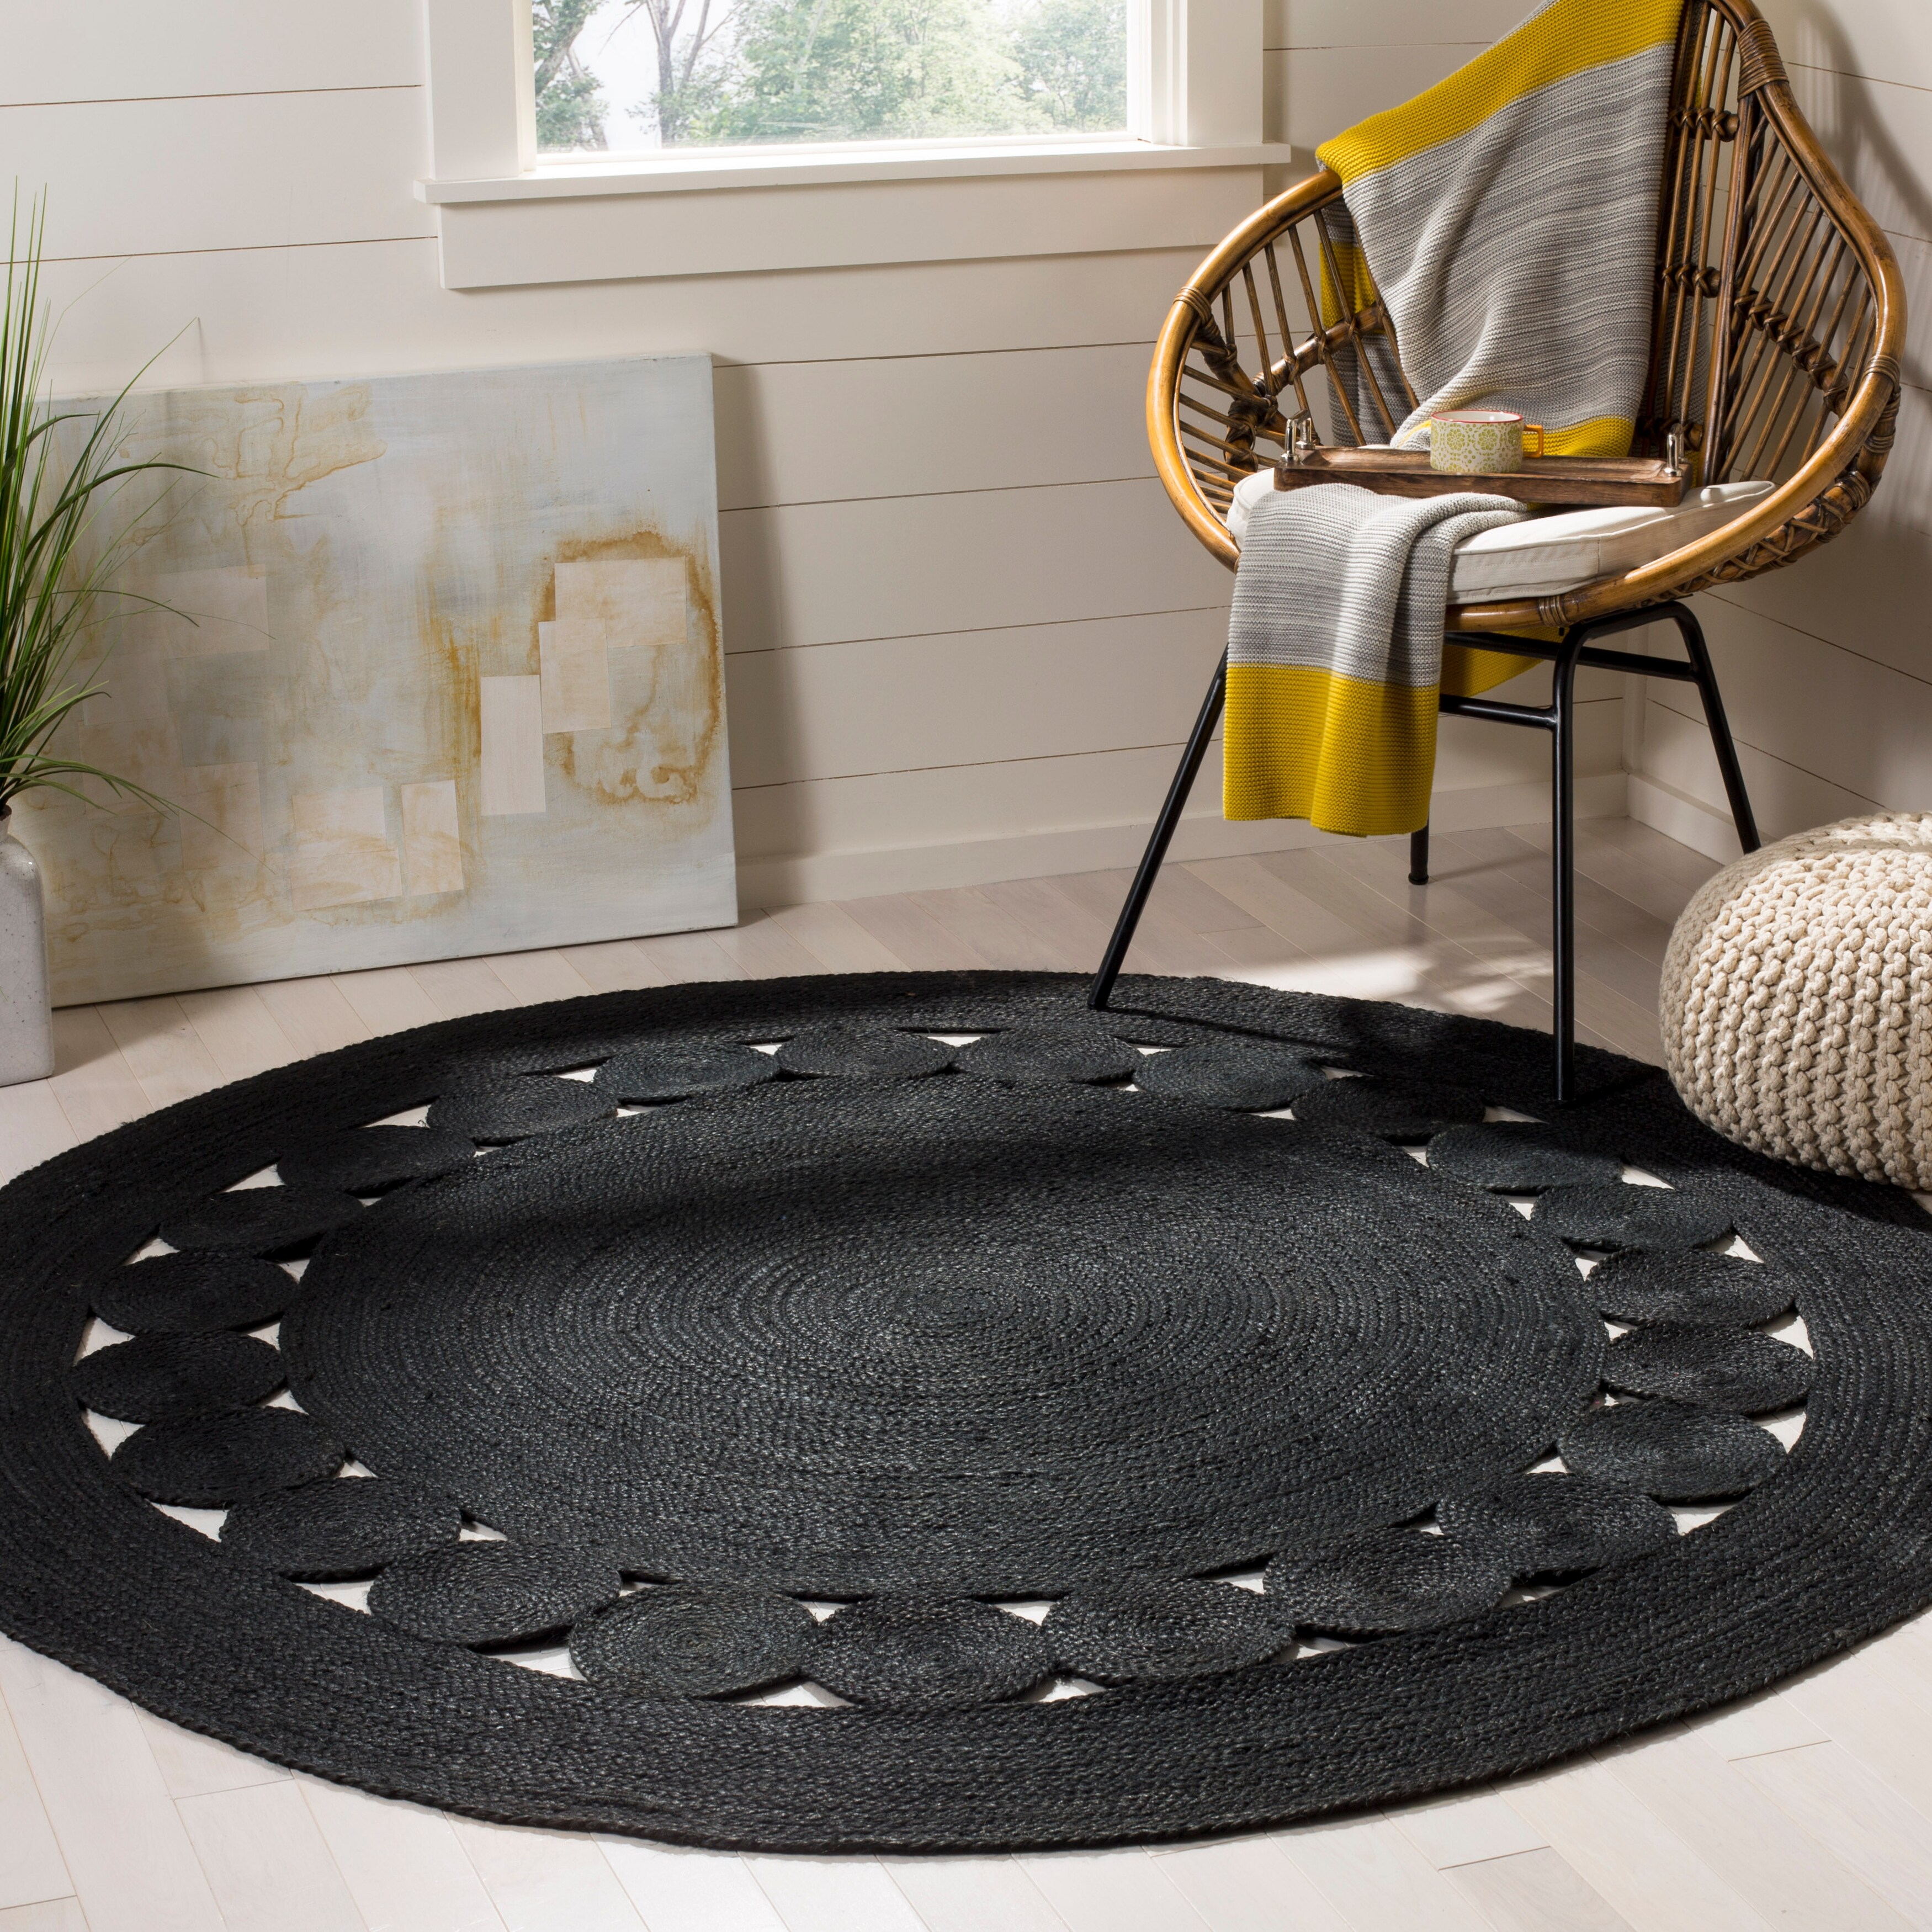 Paco Home Hand-Woven Area Rug Round with Natural Jute Fibers in Beige Brown, Size: 3'11 Round